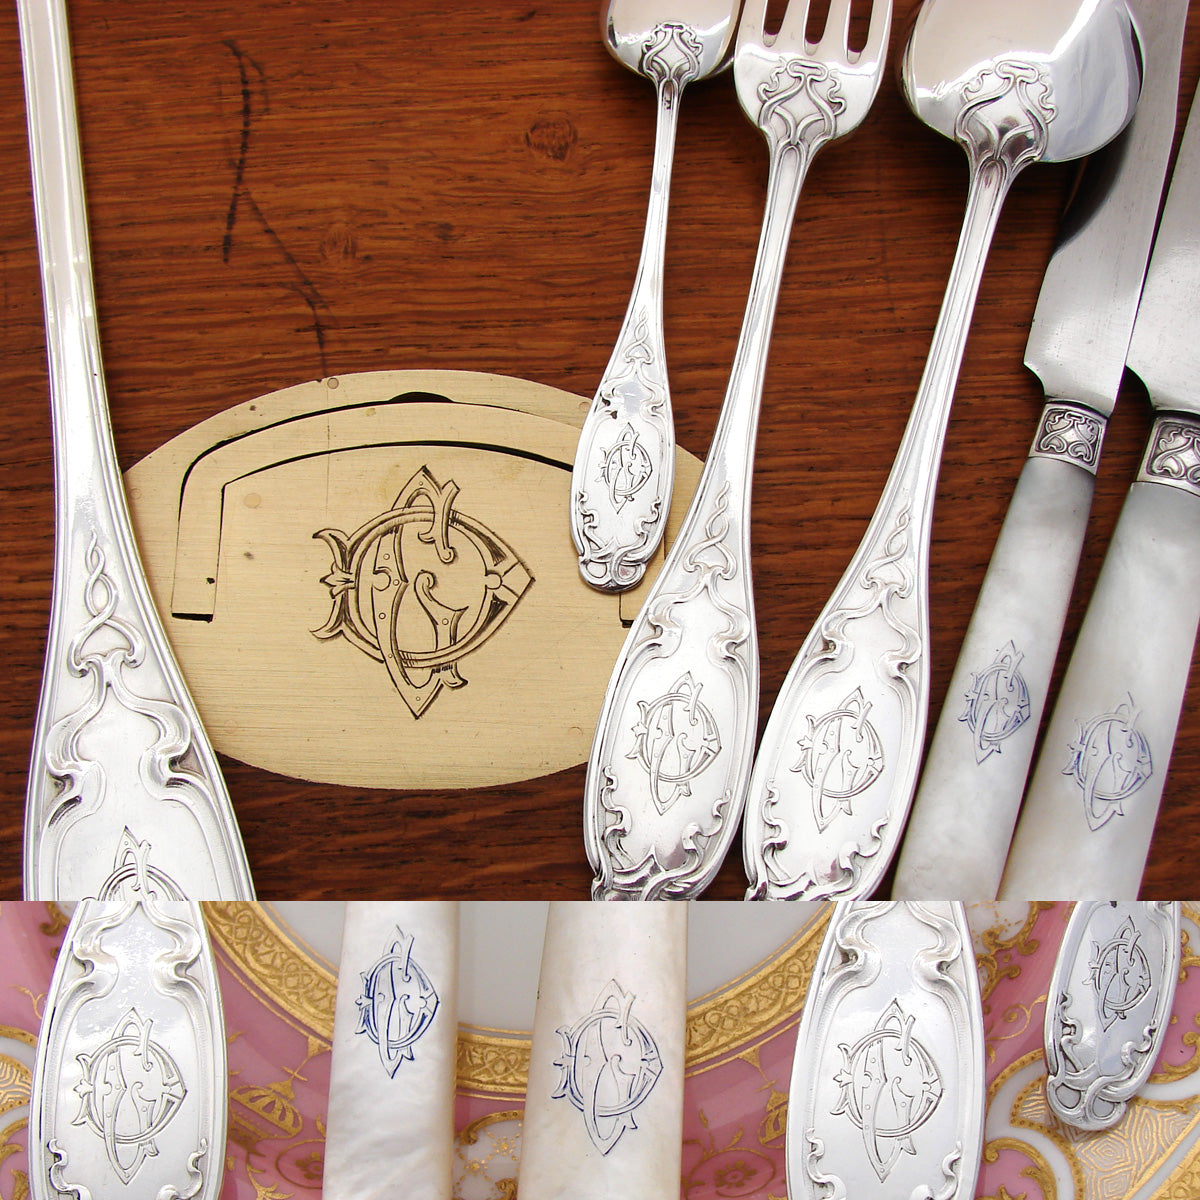 RARE Antique French Sterling Silver 60pc Flatware Set, 5pc for TWELVE with Ladle, Chest